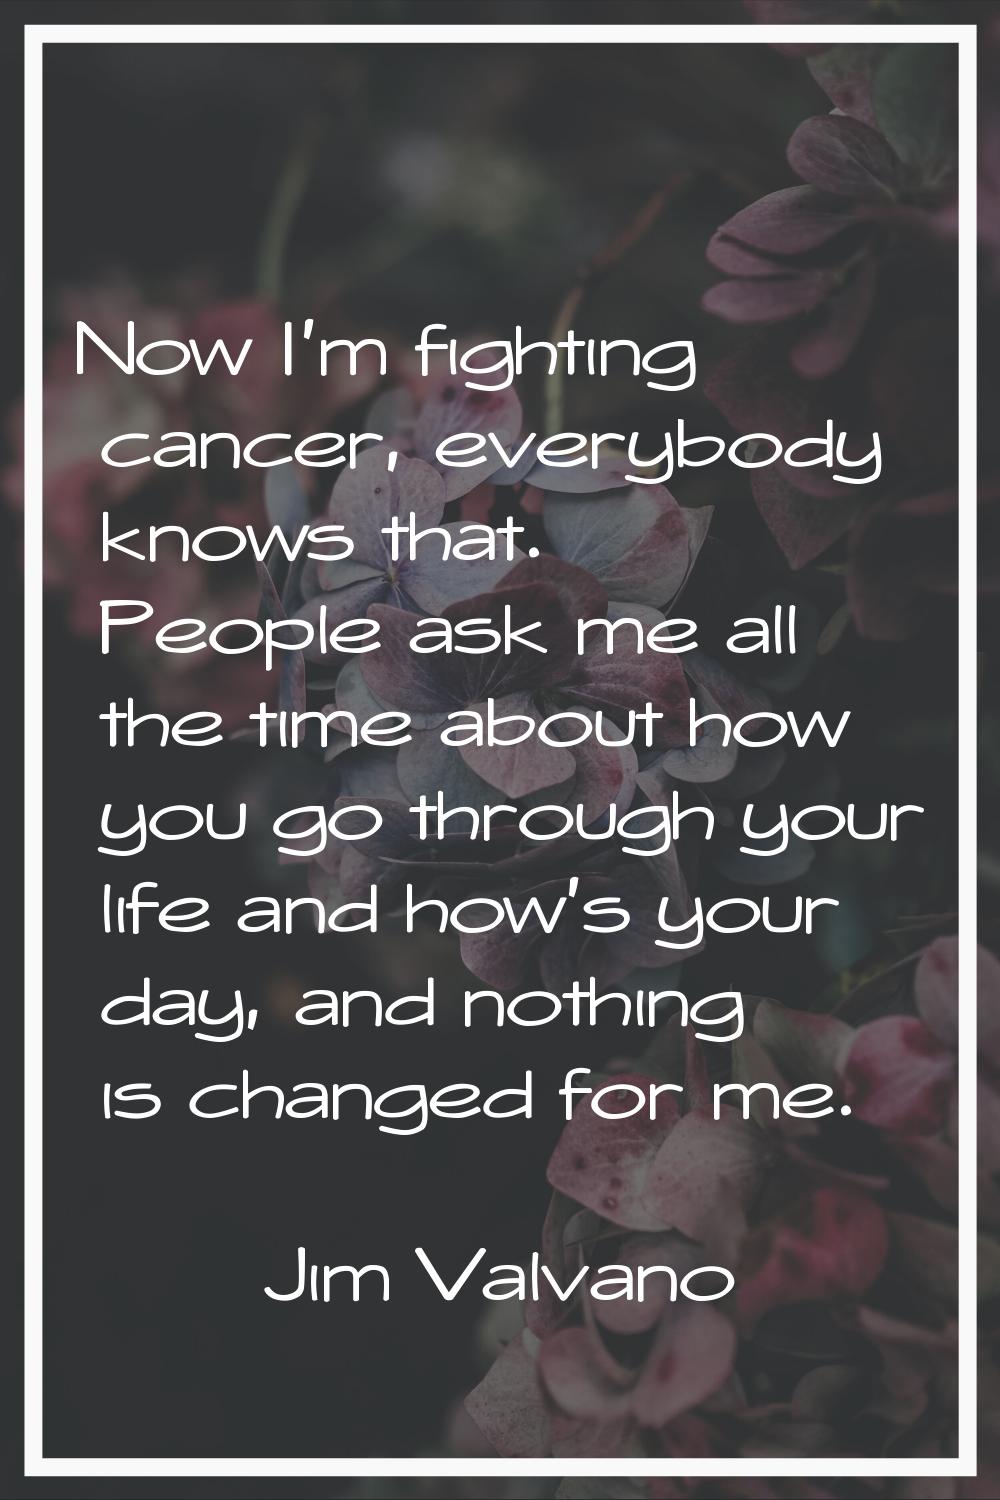 Now I'm fighting cancer, everybody knows that. People ask me all the time about how you go through 